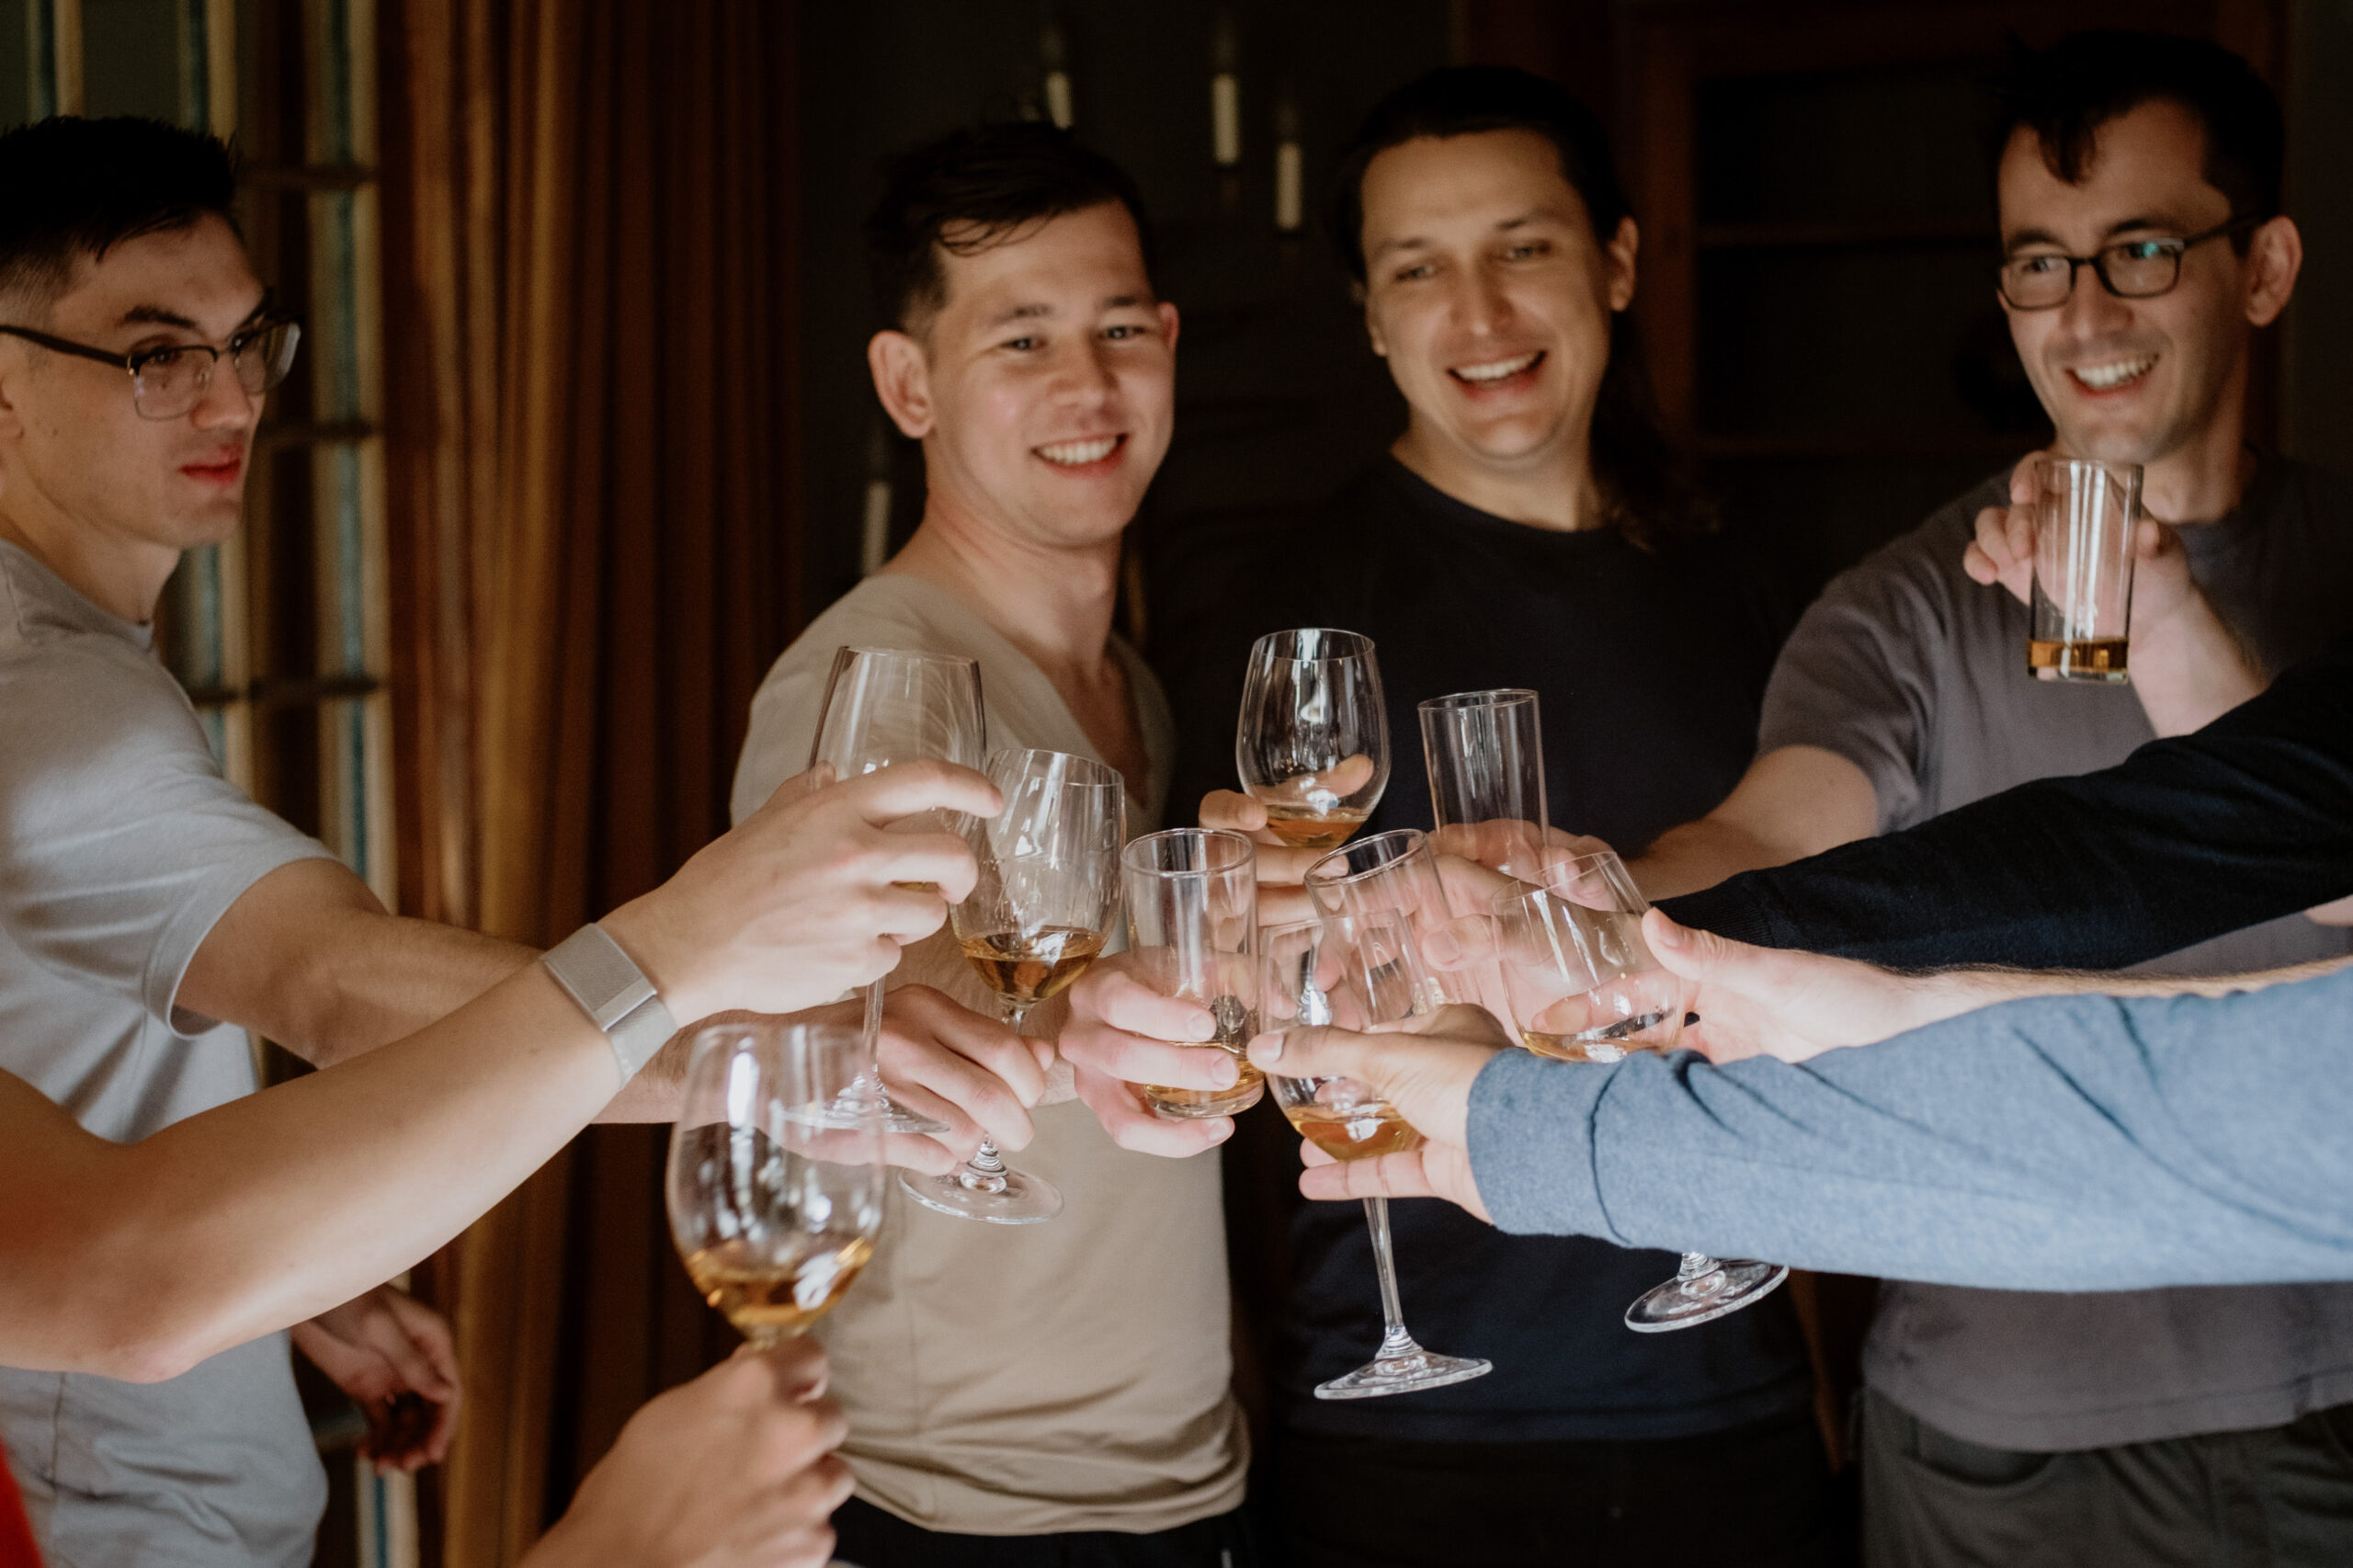 The groom and his groomsmen are enjoying drinking before the wedding ceremony. Image by Jenny Fu Studio